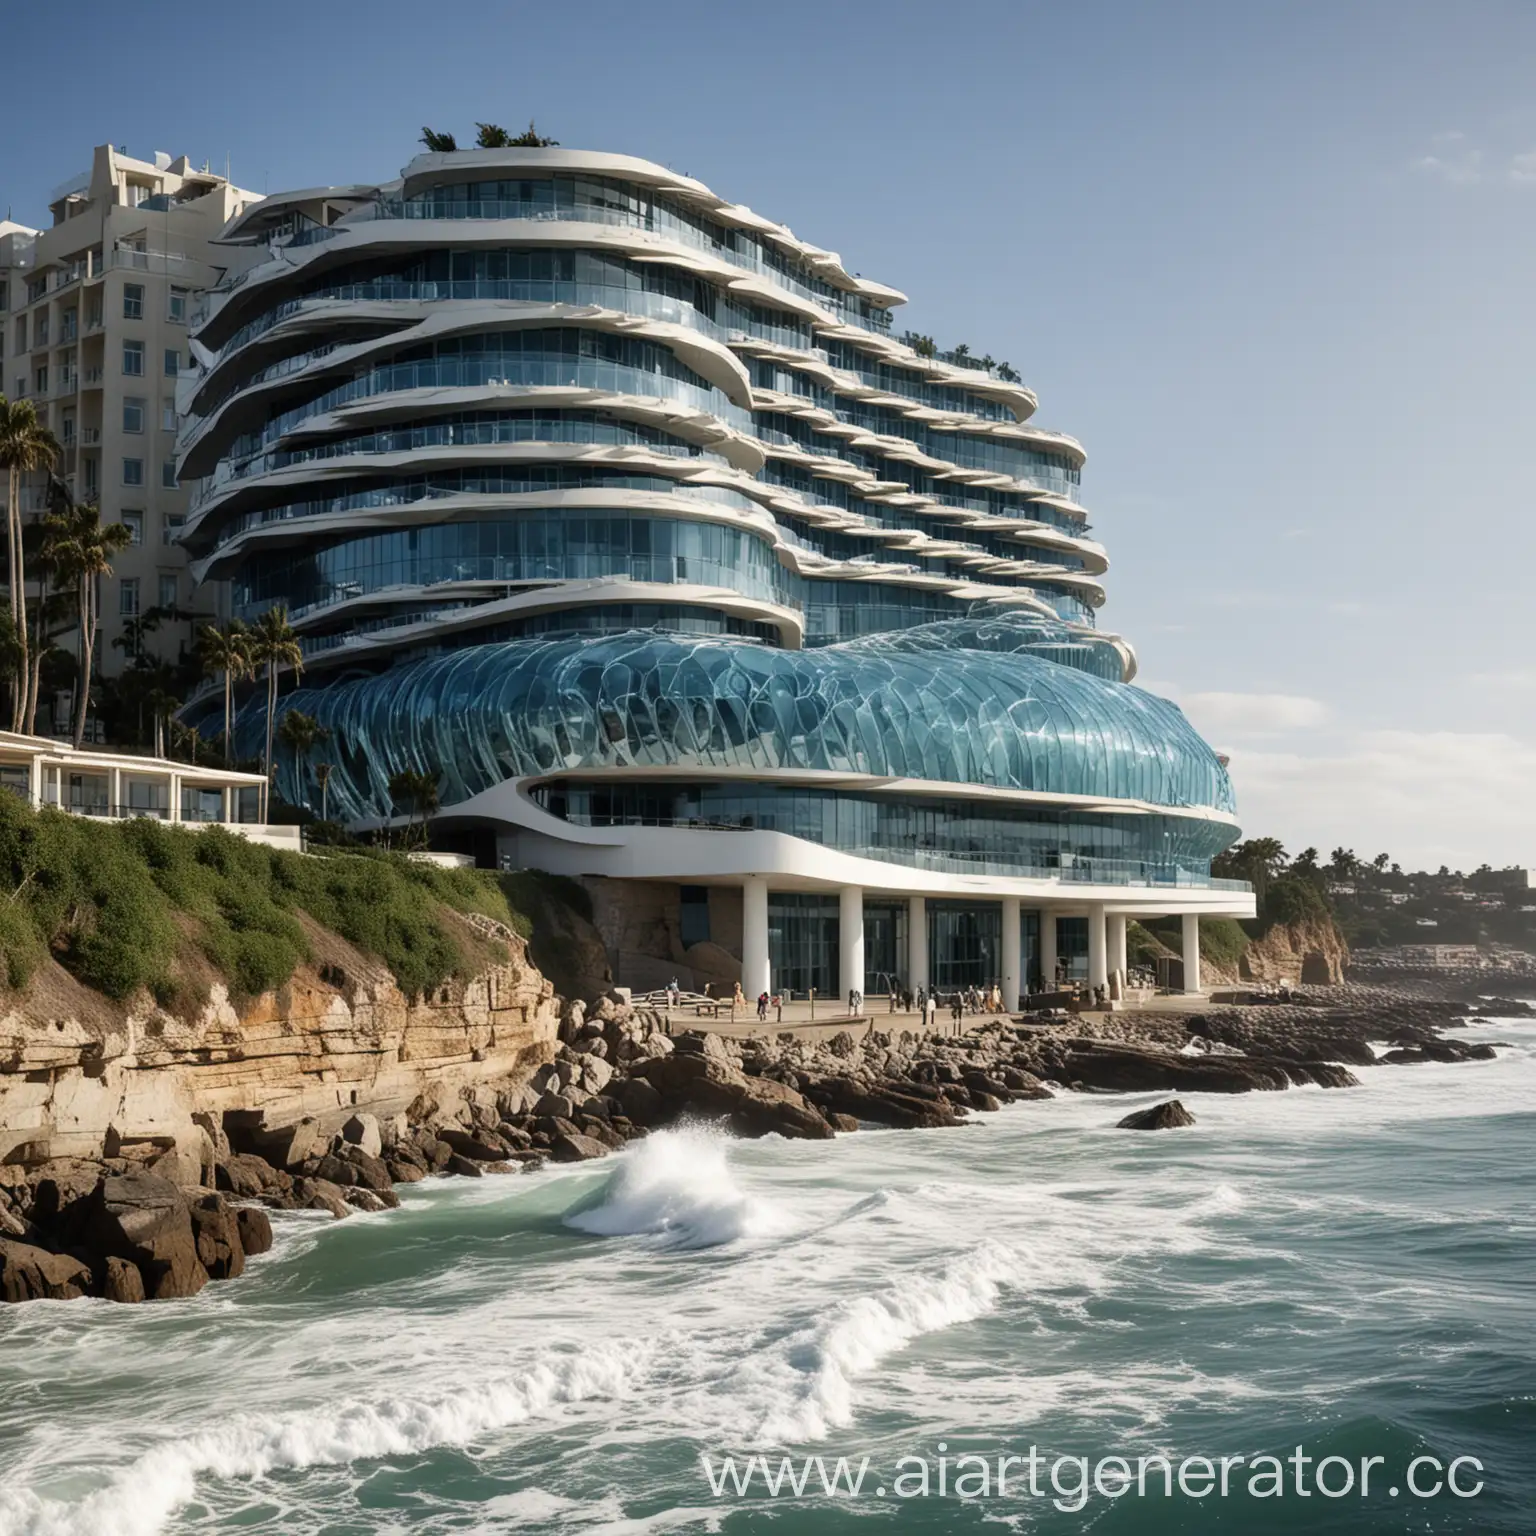 The big hotel, named "The Wave", should have an unusual shape inspired by a crashing wave in the ocean. The building should be curved and flowing, resembling the motion of a wave as it crests and curls. The exterior should be made of blue-tinted glass to reflect the color of the ocean, with intricate wave patterns etched into the surface to mimic the texture of water. The hotel should be situated on a cliff overlooking the sea, with dramatic views of the coastline and crashing waves below. The backdrop of the hotel should be a lush, tropical landscape with palm trees swaying in the ocean breeze. In terms of style, "The Wave" should have a modern and sleek design with minimalist touches to enhance the overall aesthetic. The colors of the exterior should be a mix of deep blues, aquamarines, and crisp whites to evoke a sense of serenity and tranquility. Overall, "The Wave" hotel should be a striking and unique architectural masterpiece that captures the beauty and power of the ocean, providing guests with a truly immersive and unforgettable experience.